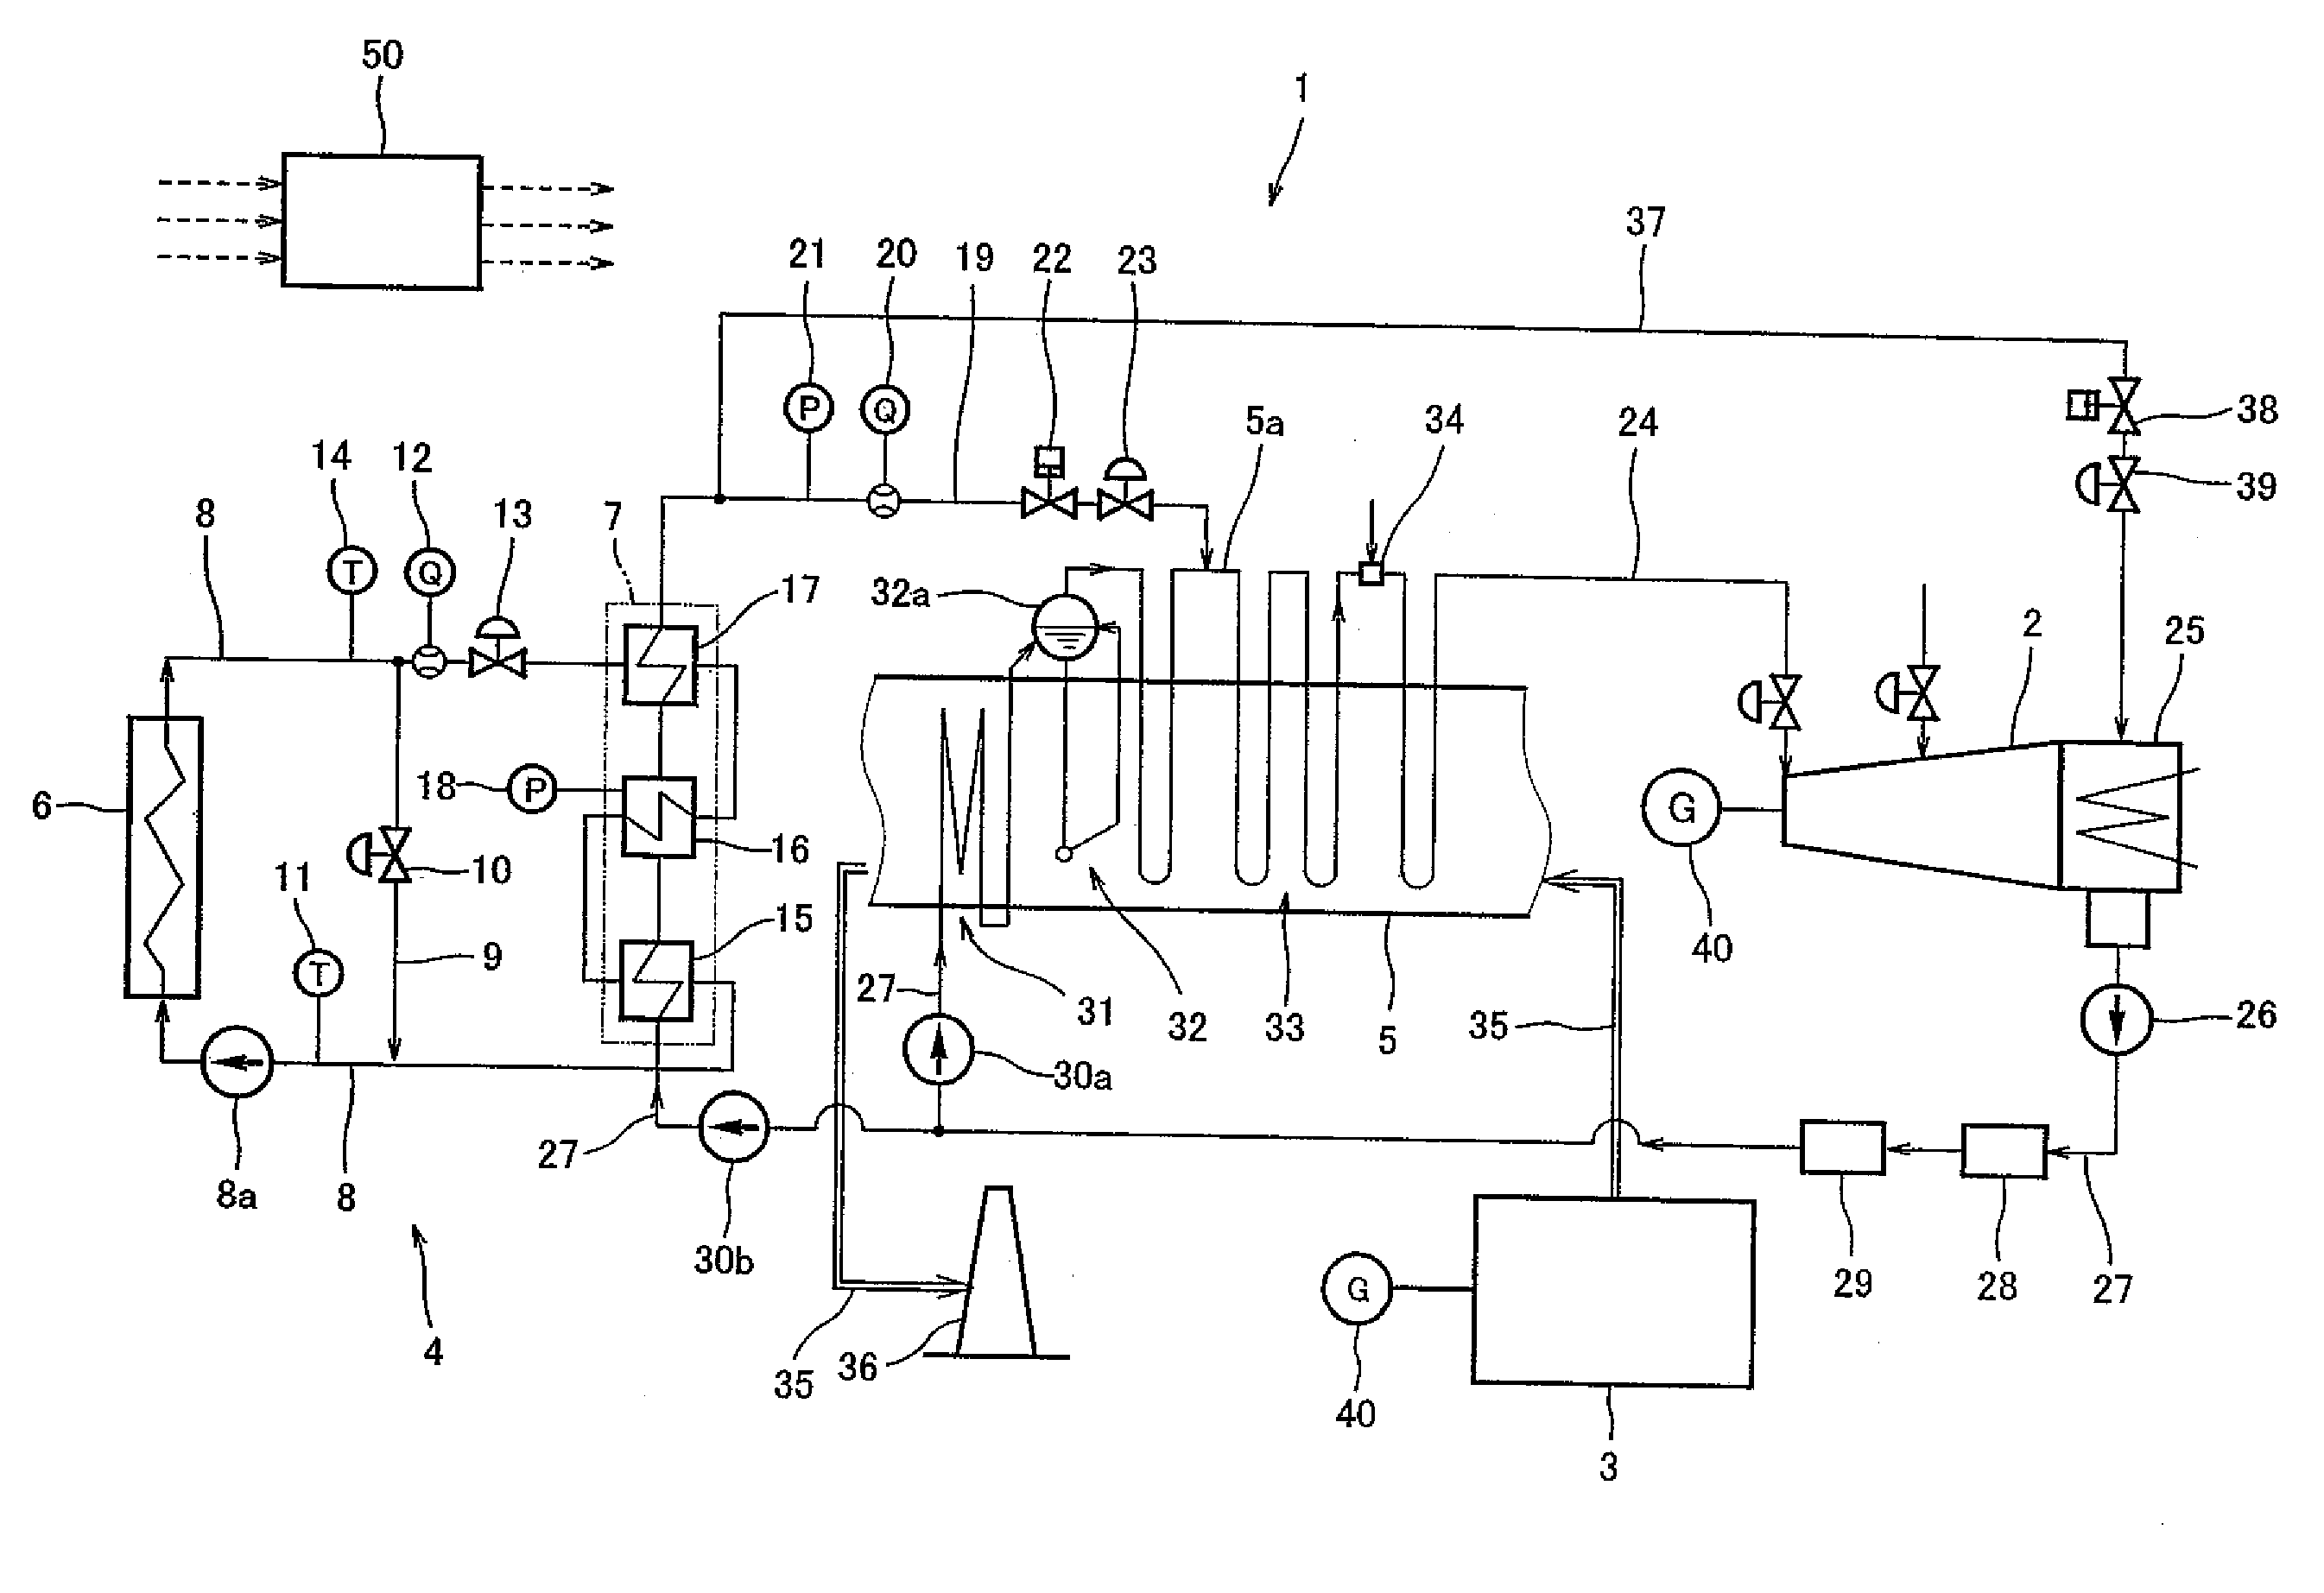 Heating Medium Supply System, Integrated Solar Combined Cycle Electric Power Generation System and Method of Controlling These Systems